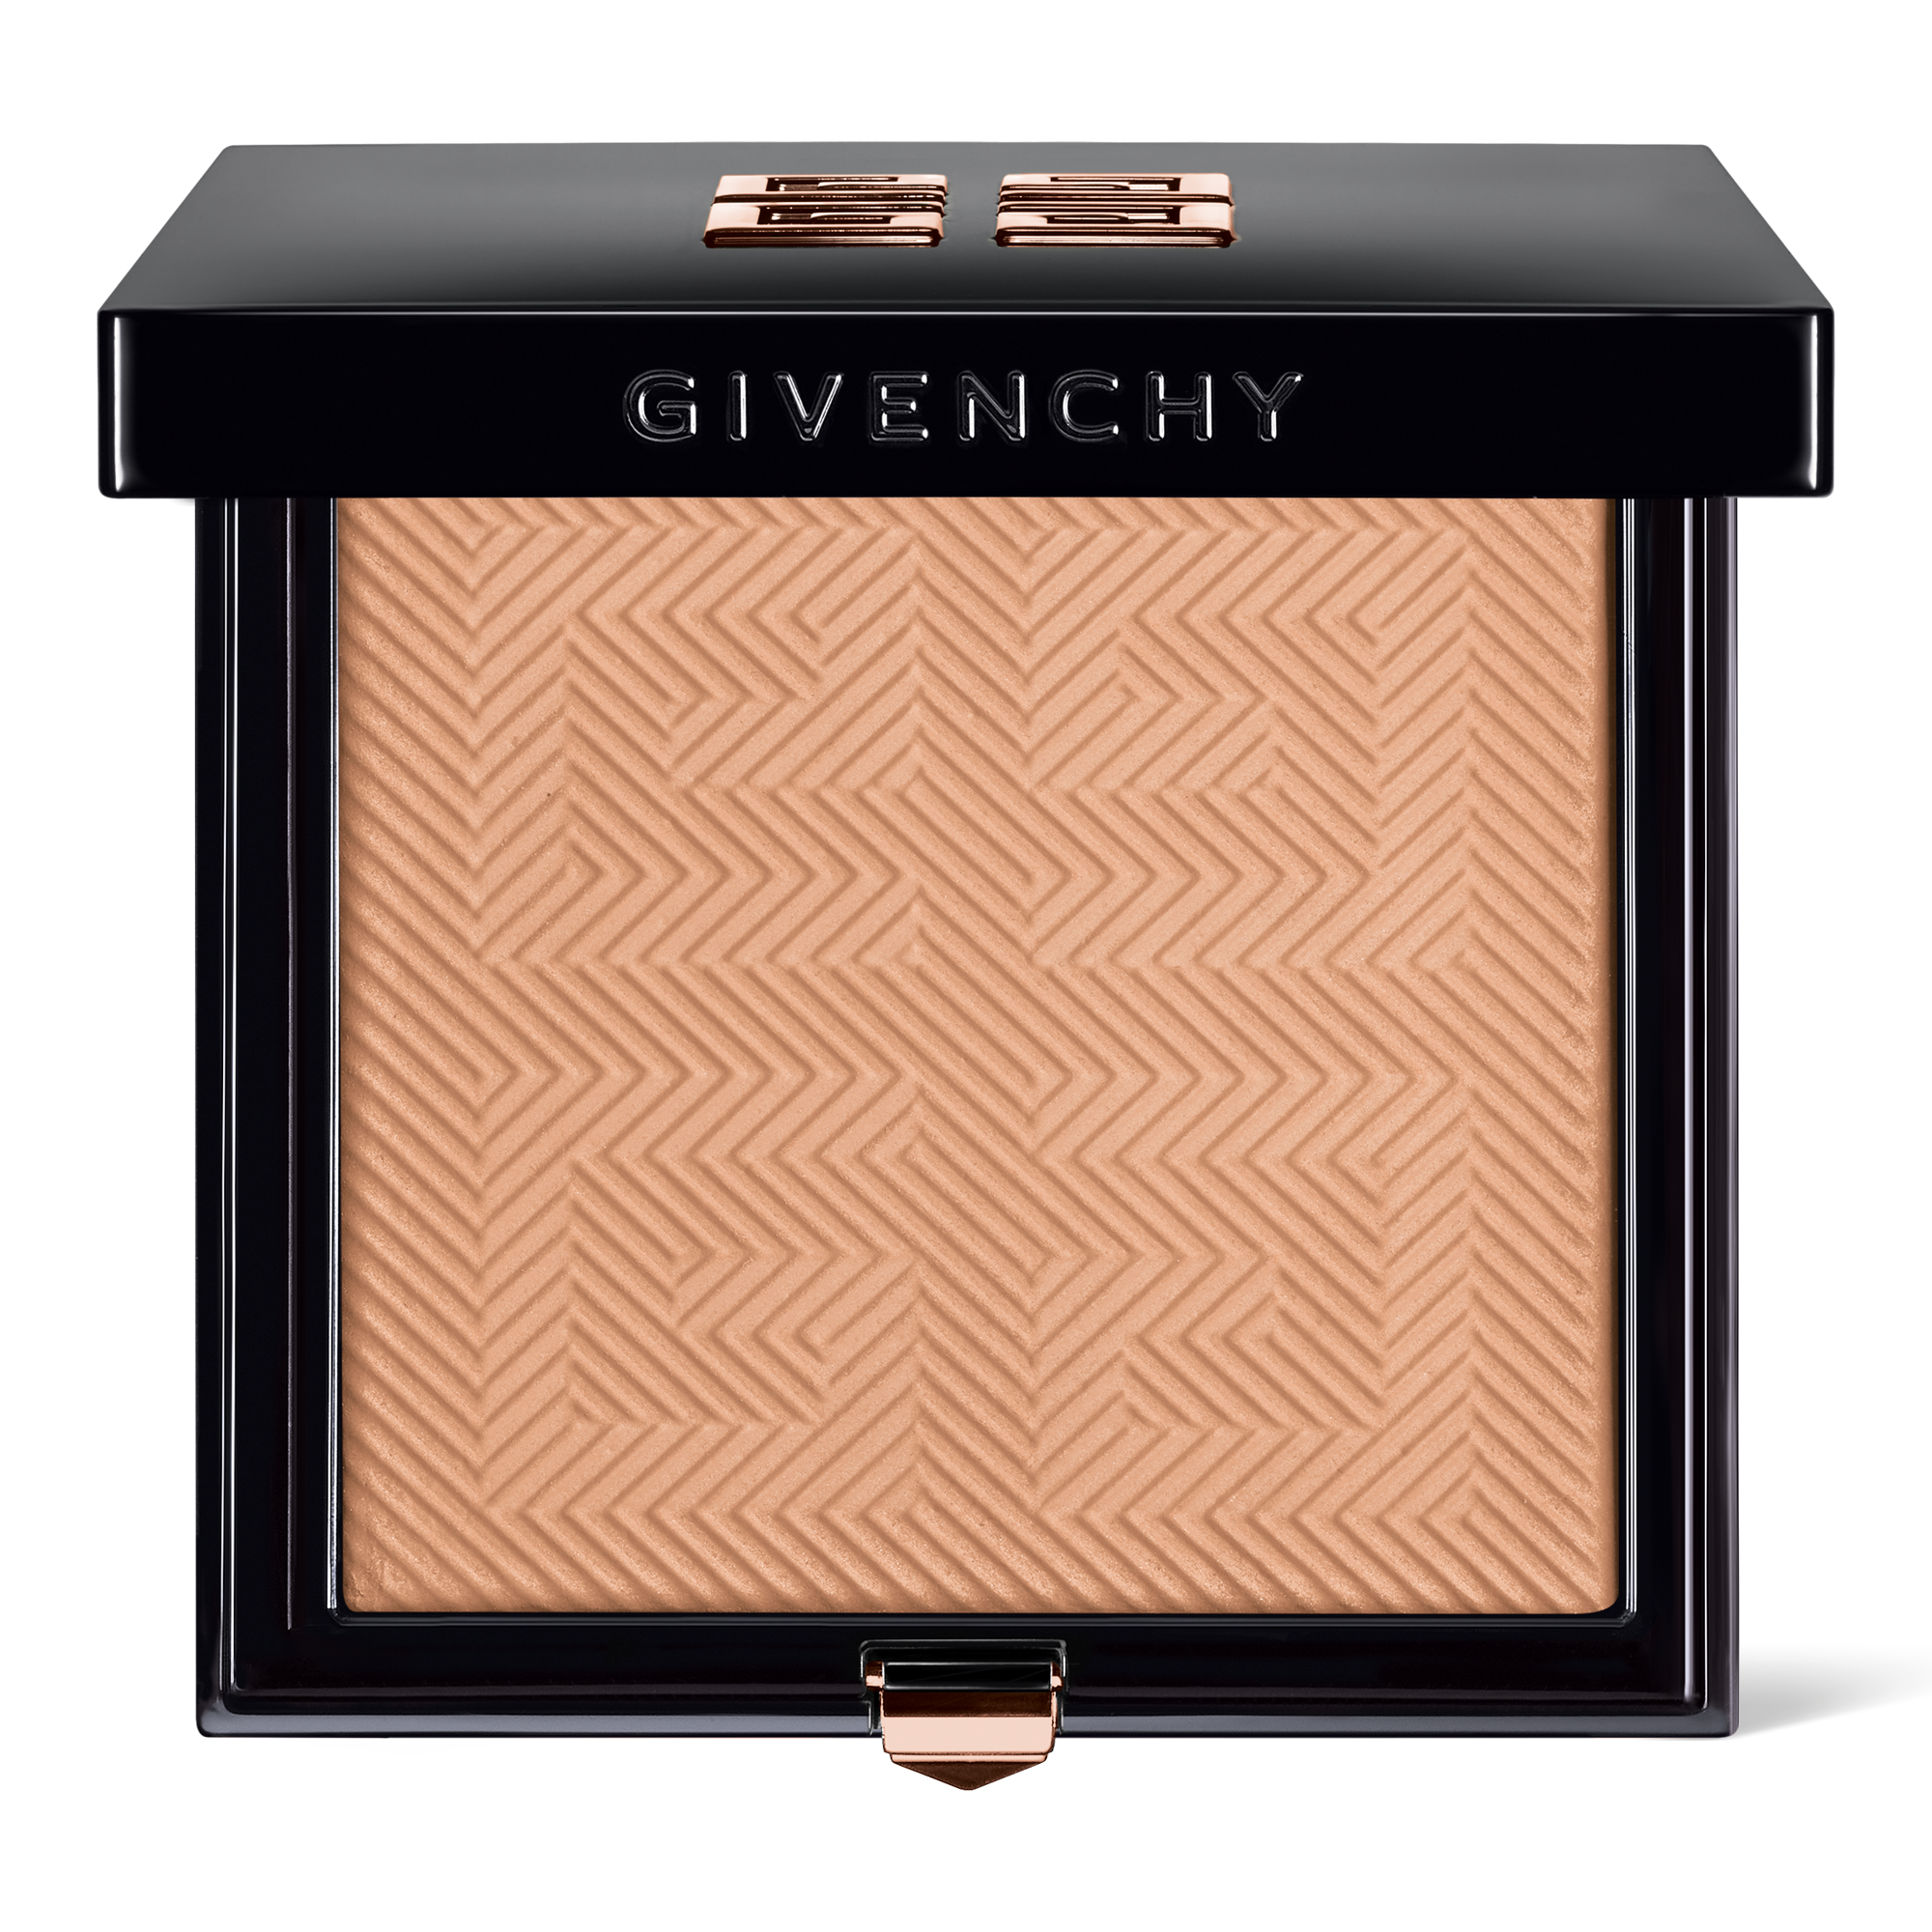 Top 73+ imagen givenchy healthy glow powder